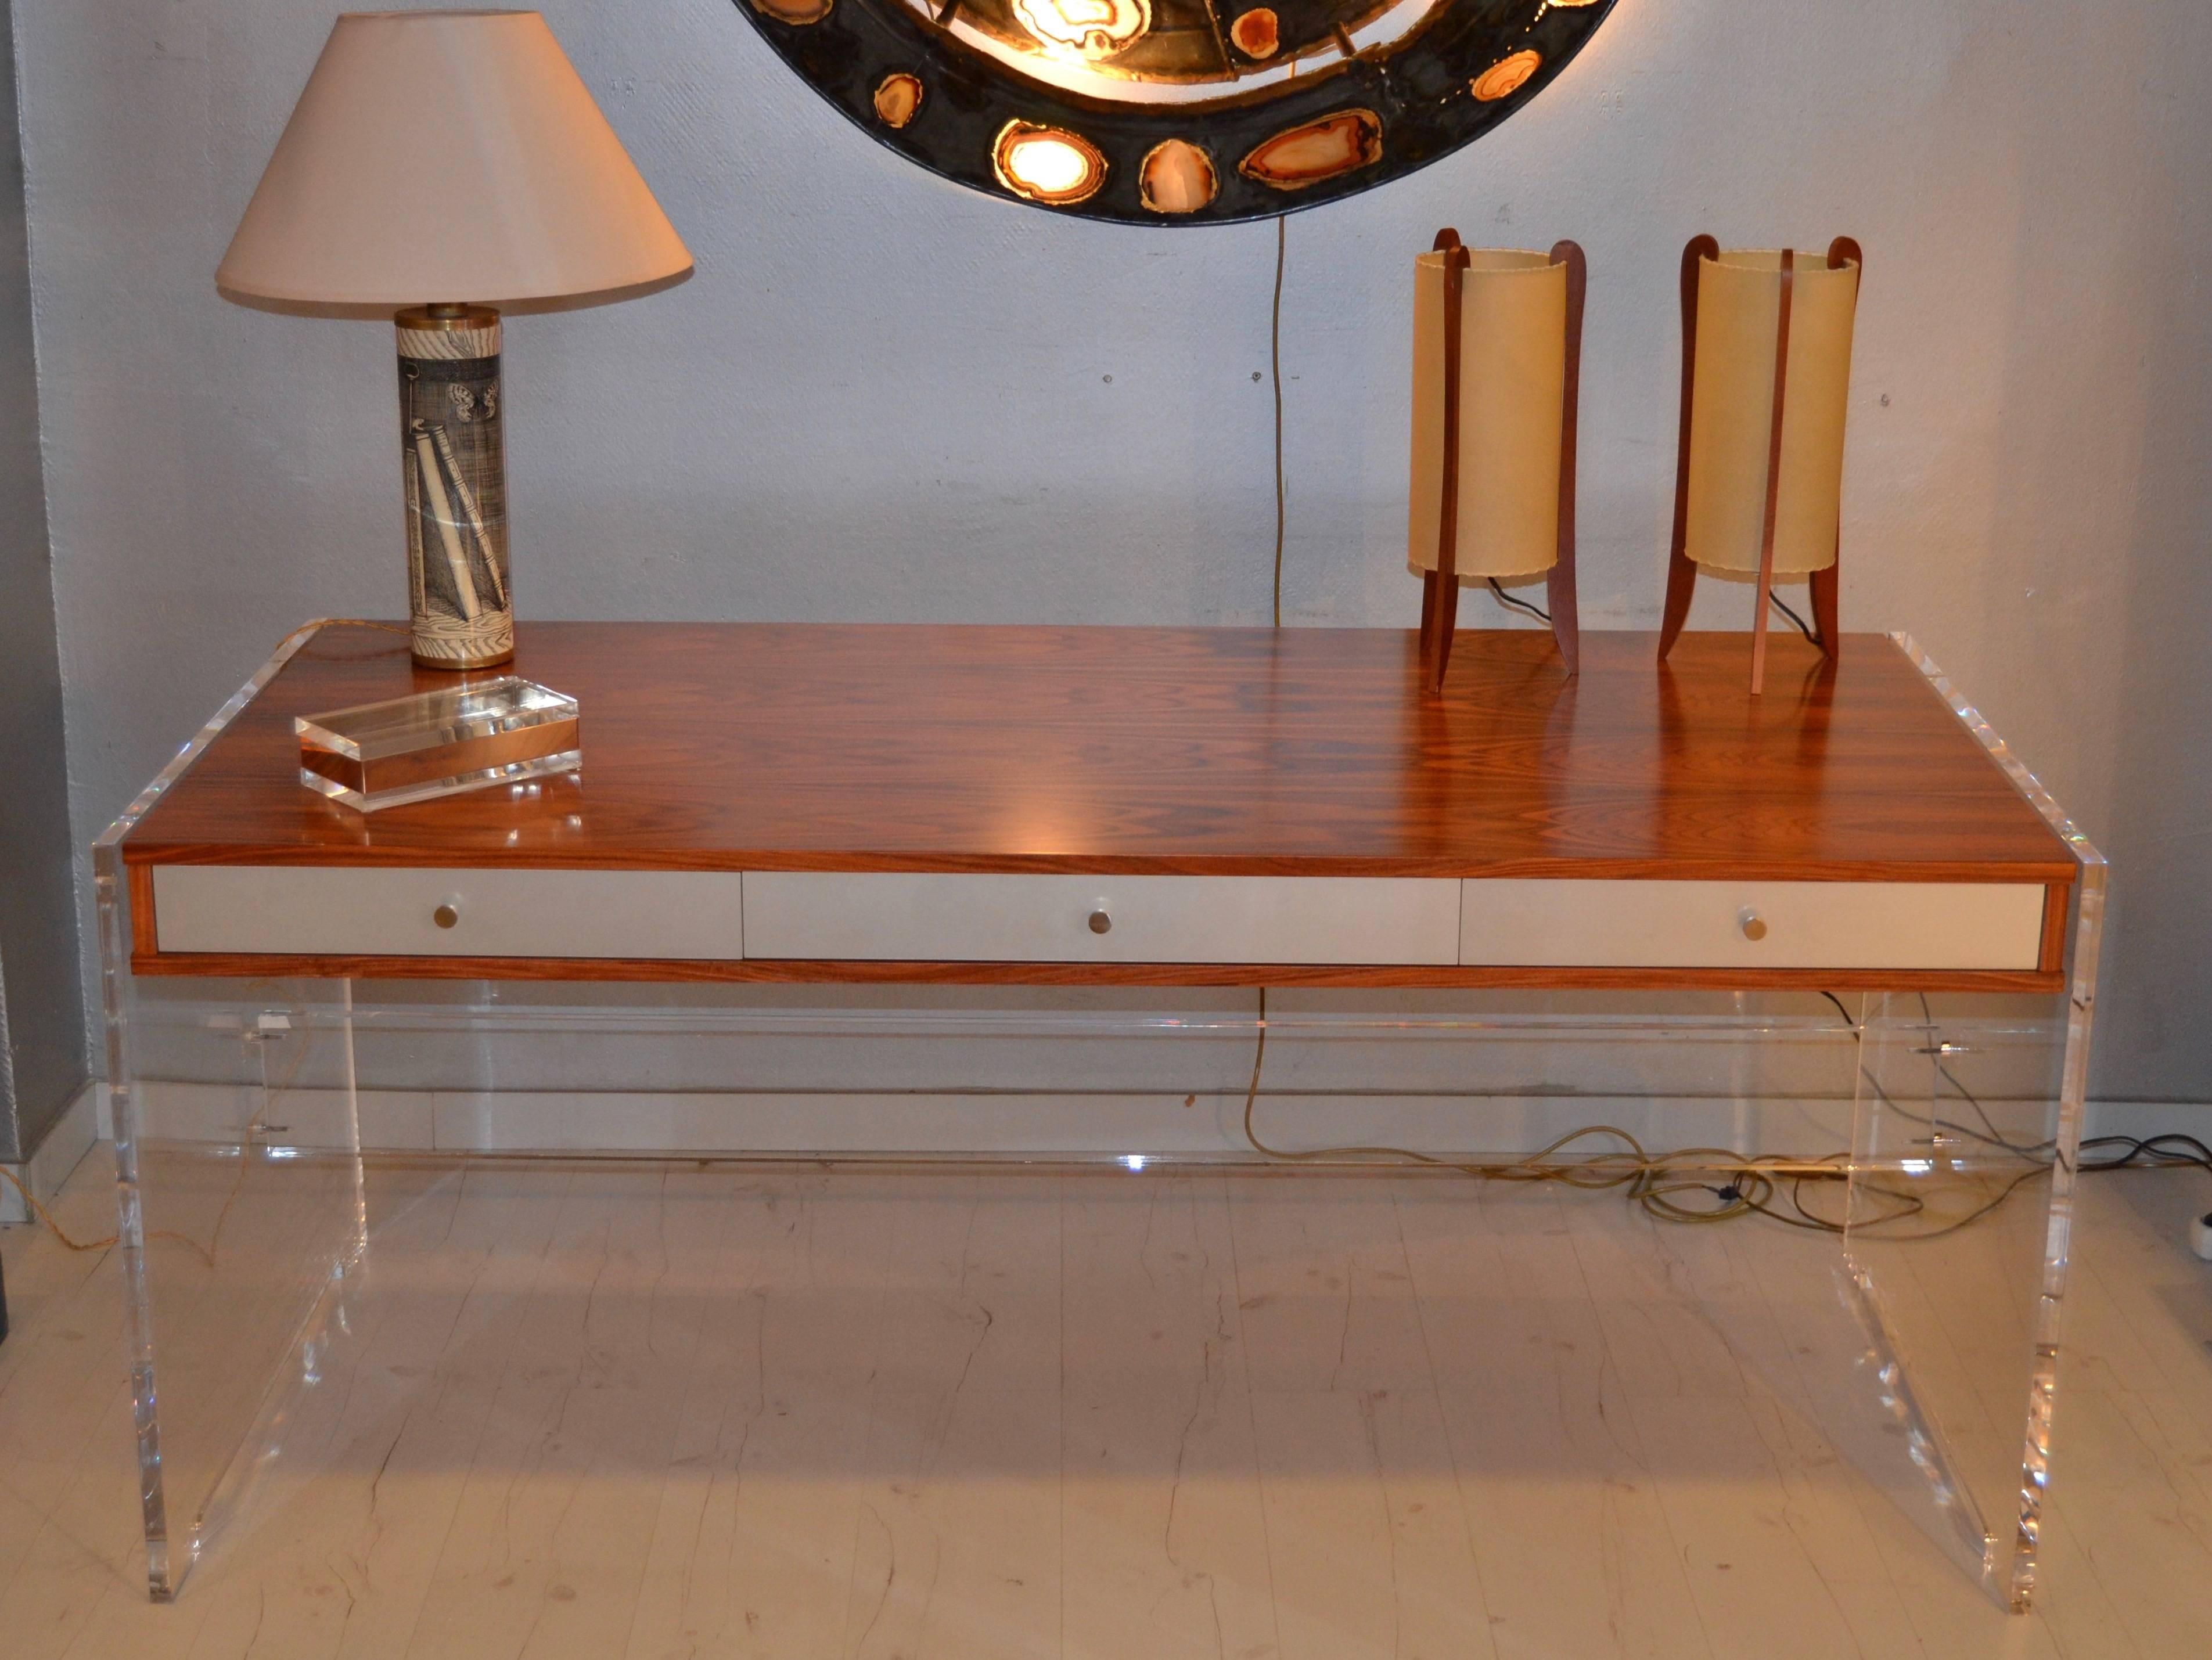 1970s rosewood and Lucite desk with chromed steel drawers.
Perfect condition
Designed by Poul Norrekit (Danish).